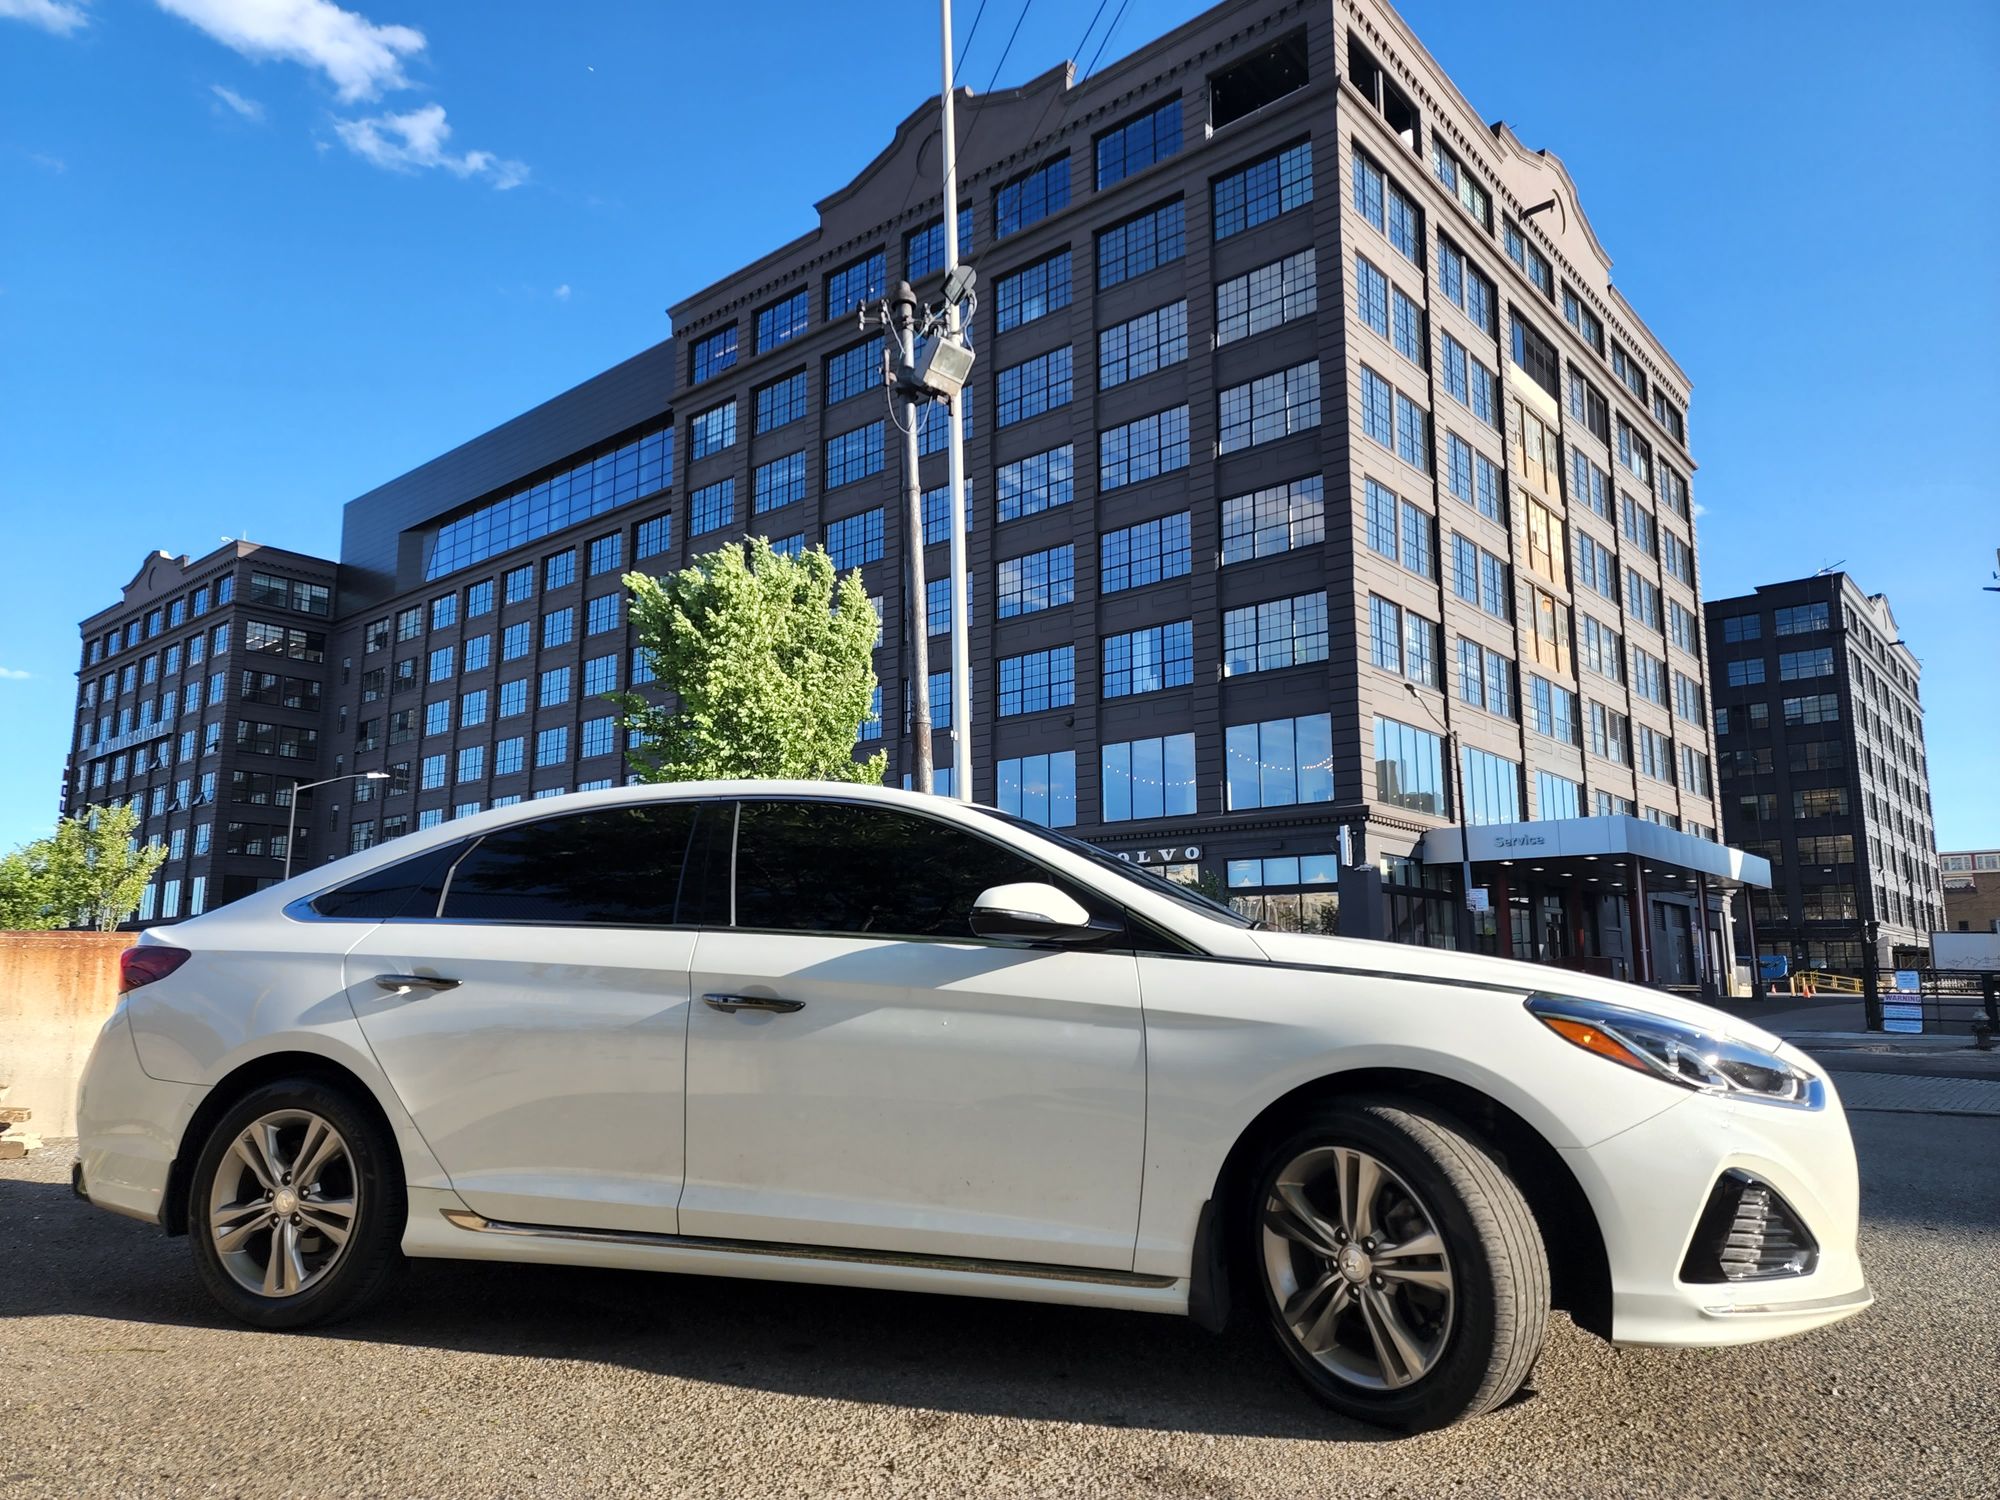 Adolfo's 2019 white Hyundai Sonata parked outdoors on a sunny day with clear skies.